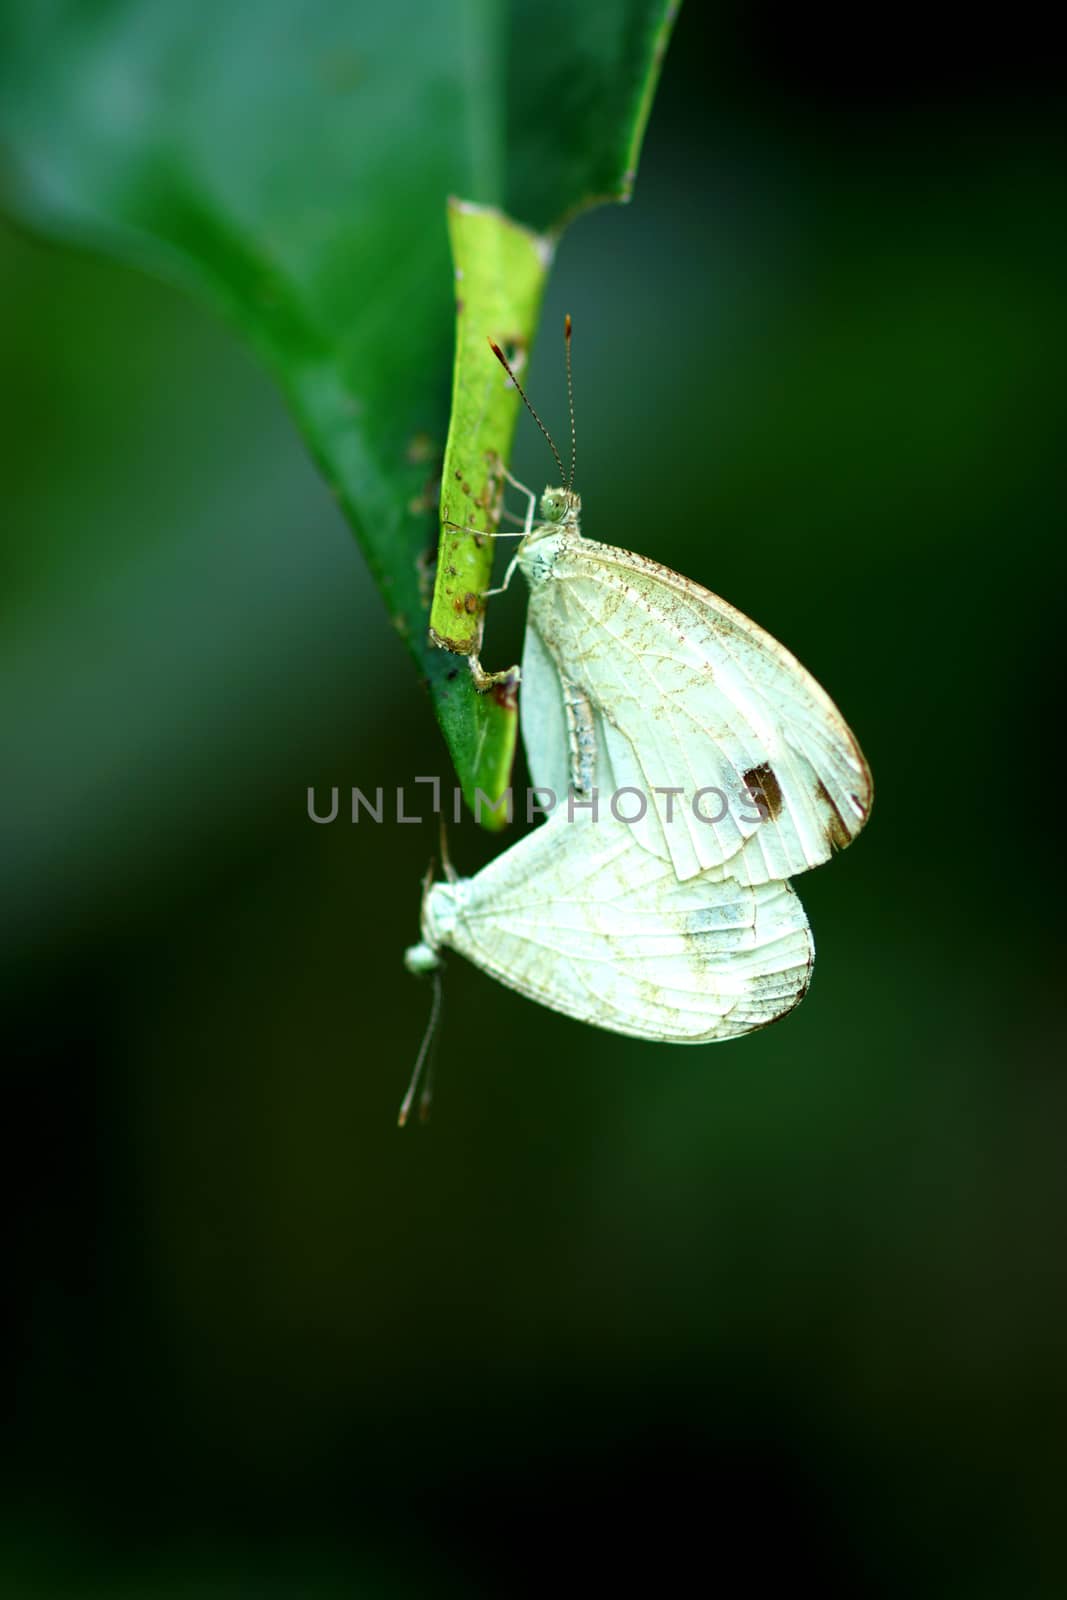 Butterfly mating by Noppharat_th